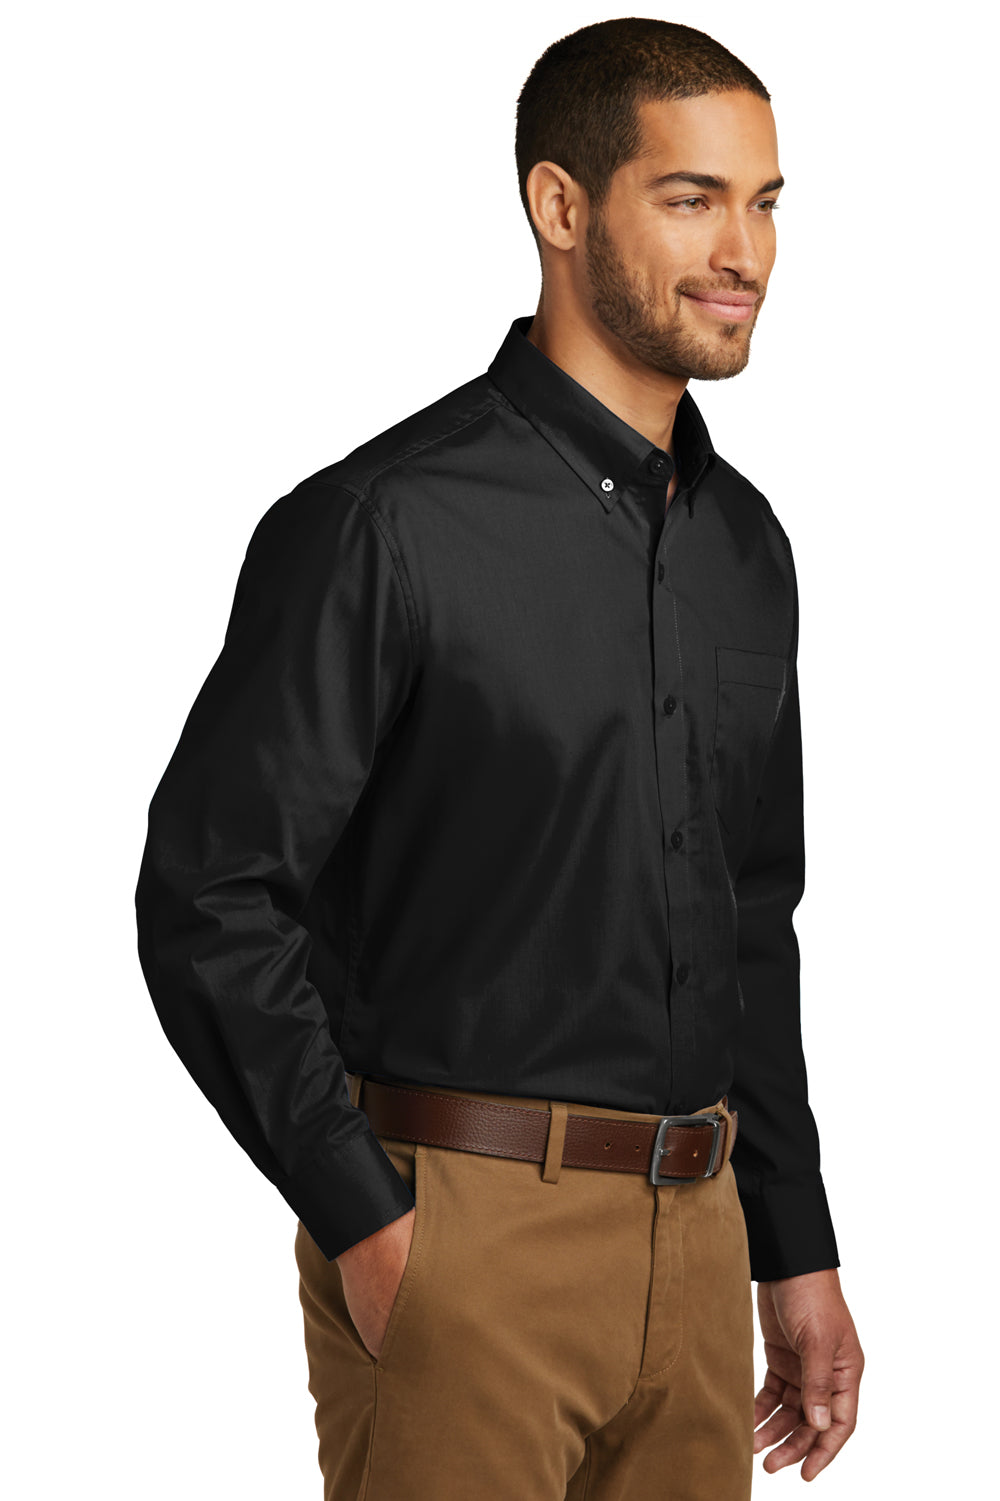 Port Authority W100/TW100 Carefree Stain Resistant Long Sleeve Button Down Shirt w/ Pocket Deep Black 3Q